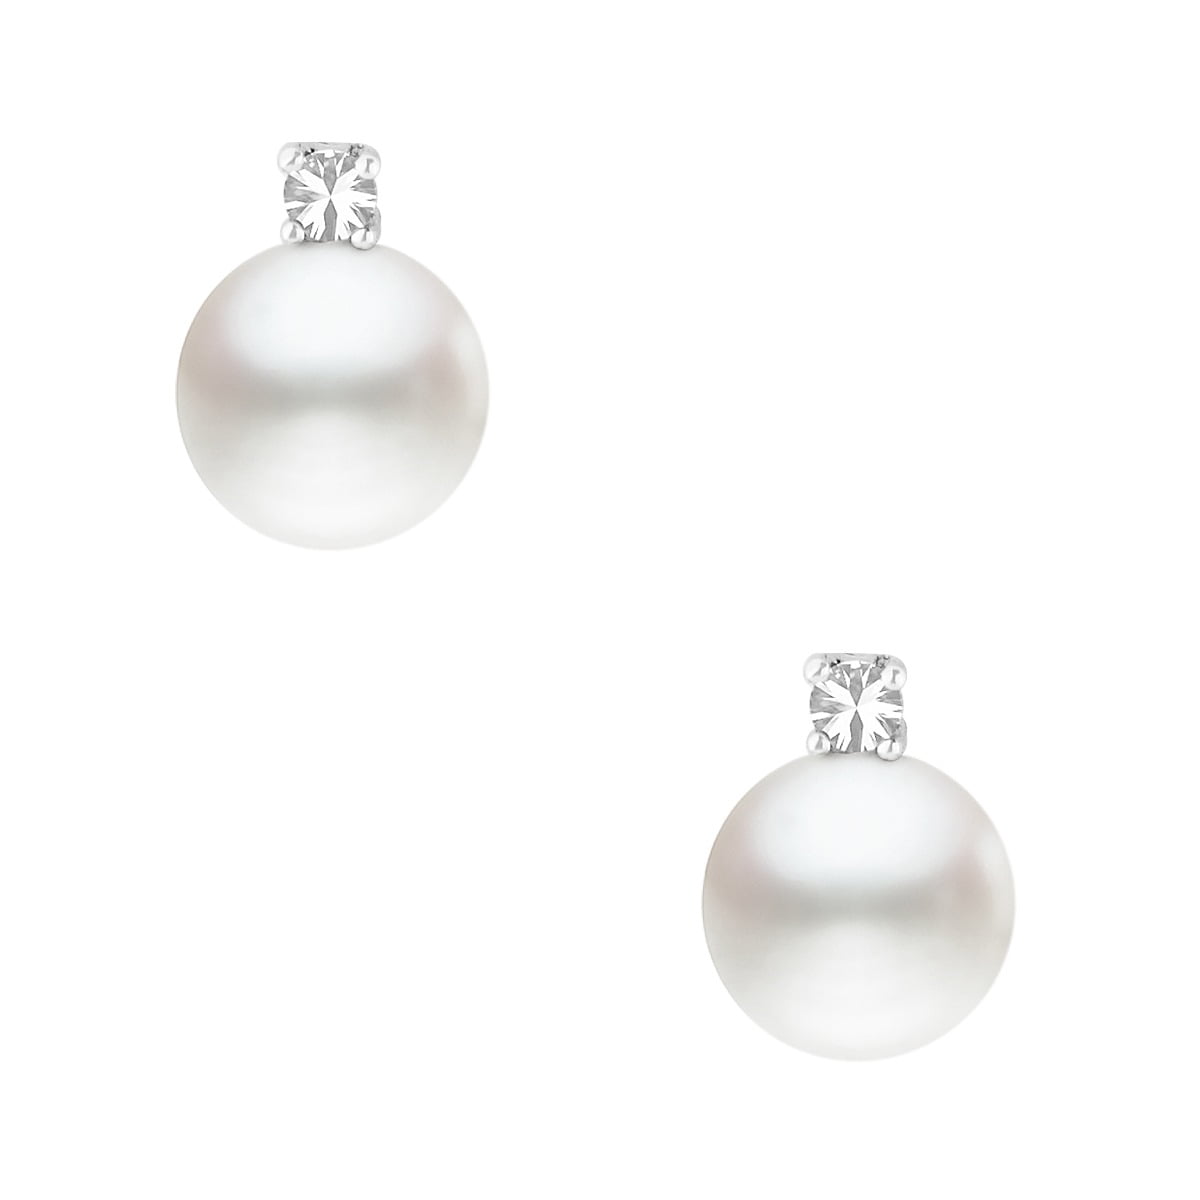 Earrings of silver 925°, with white synthetic pearl 10 mm, with single stone zirconi, with pin clasp.